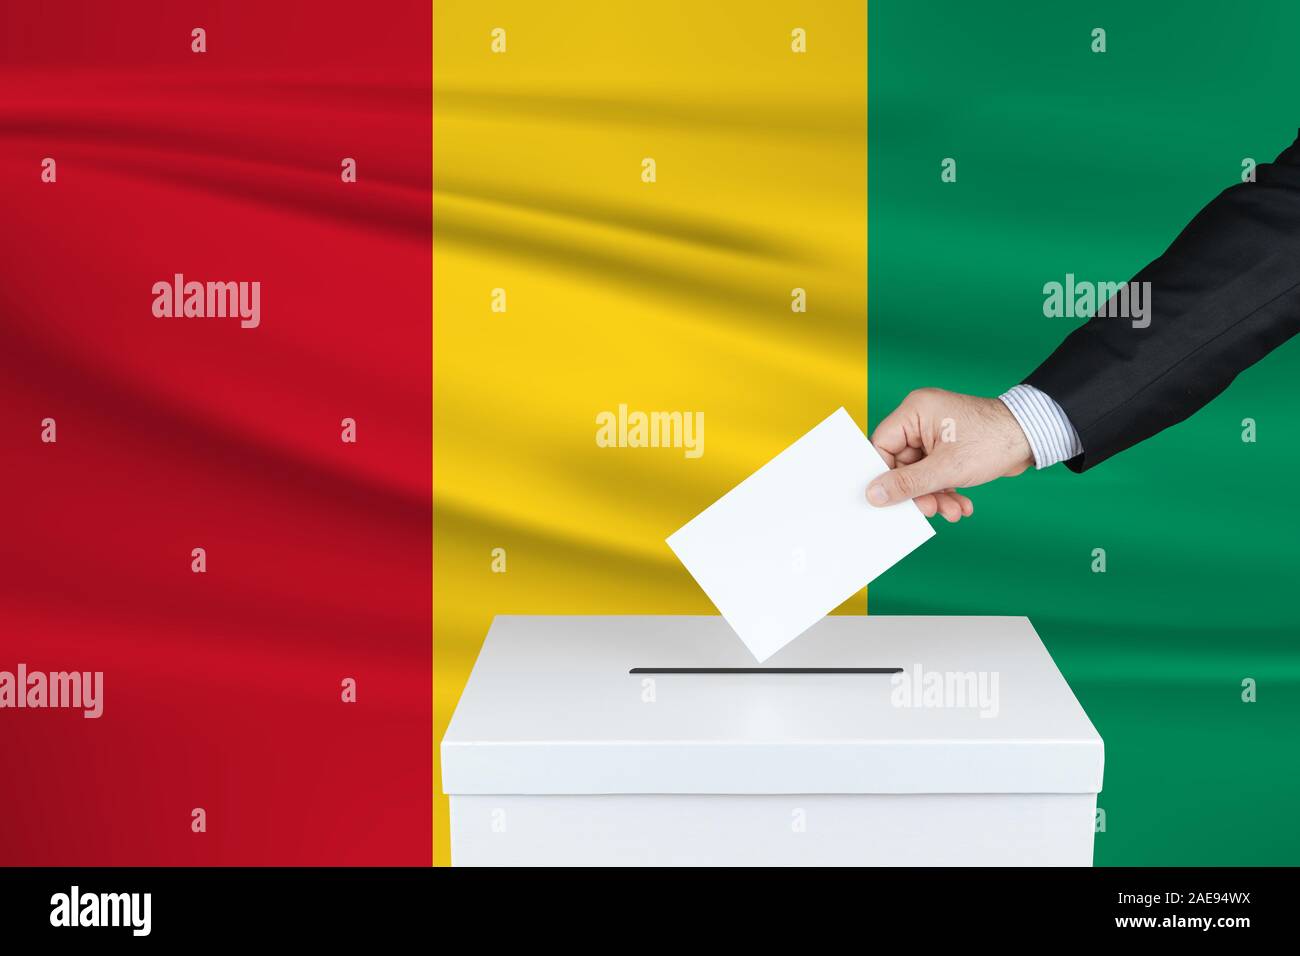 Election in Guinea. The hand of man putting his vote in the ballot box. Waved Guinea flag on background. Stock Photo